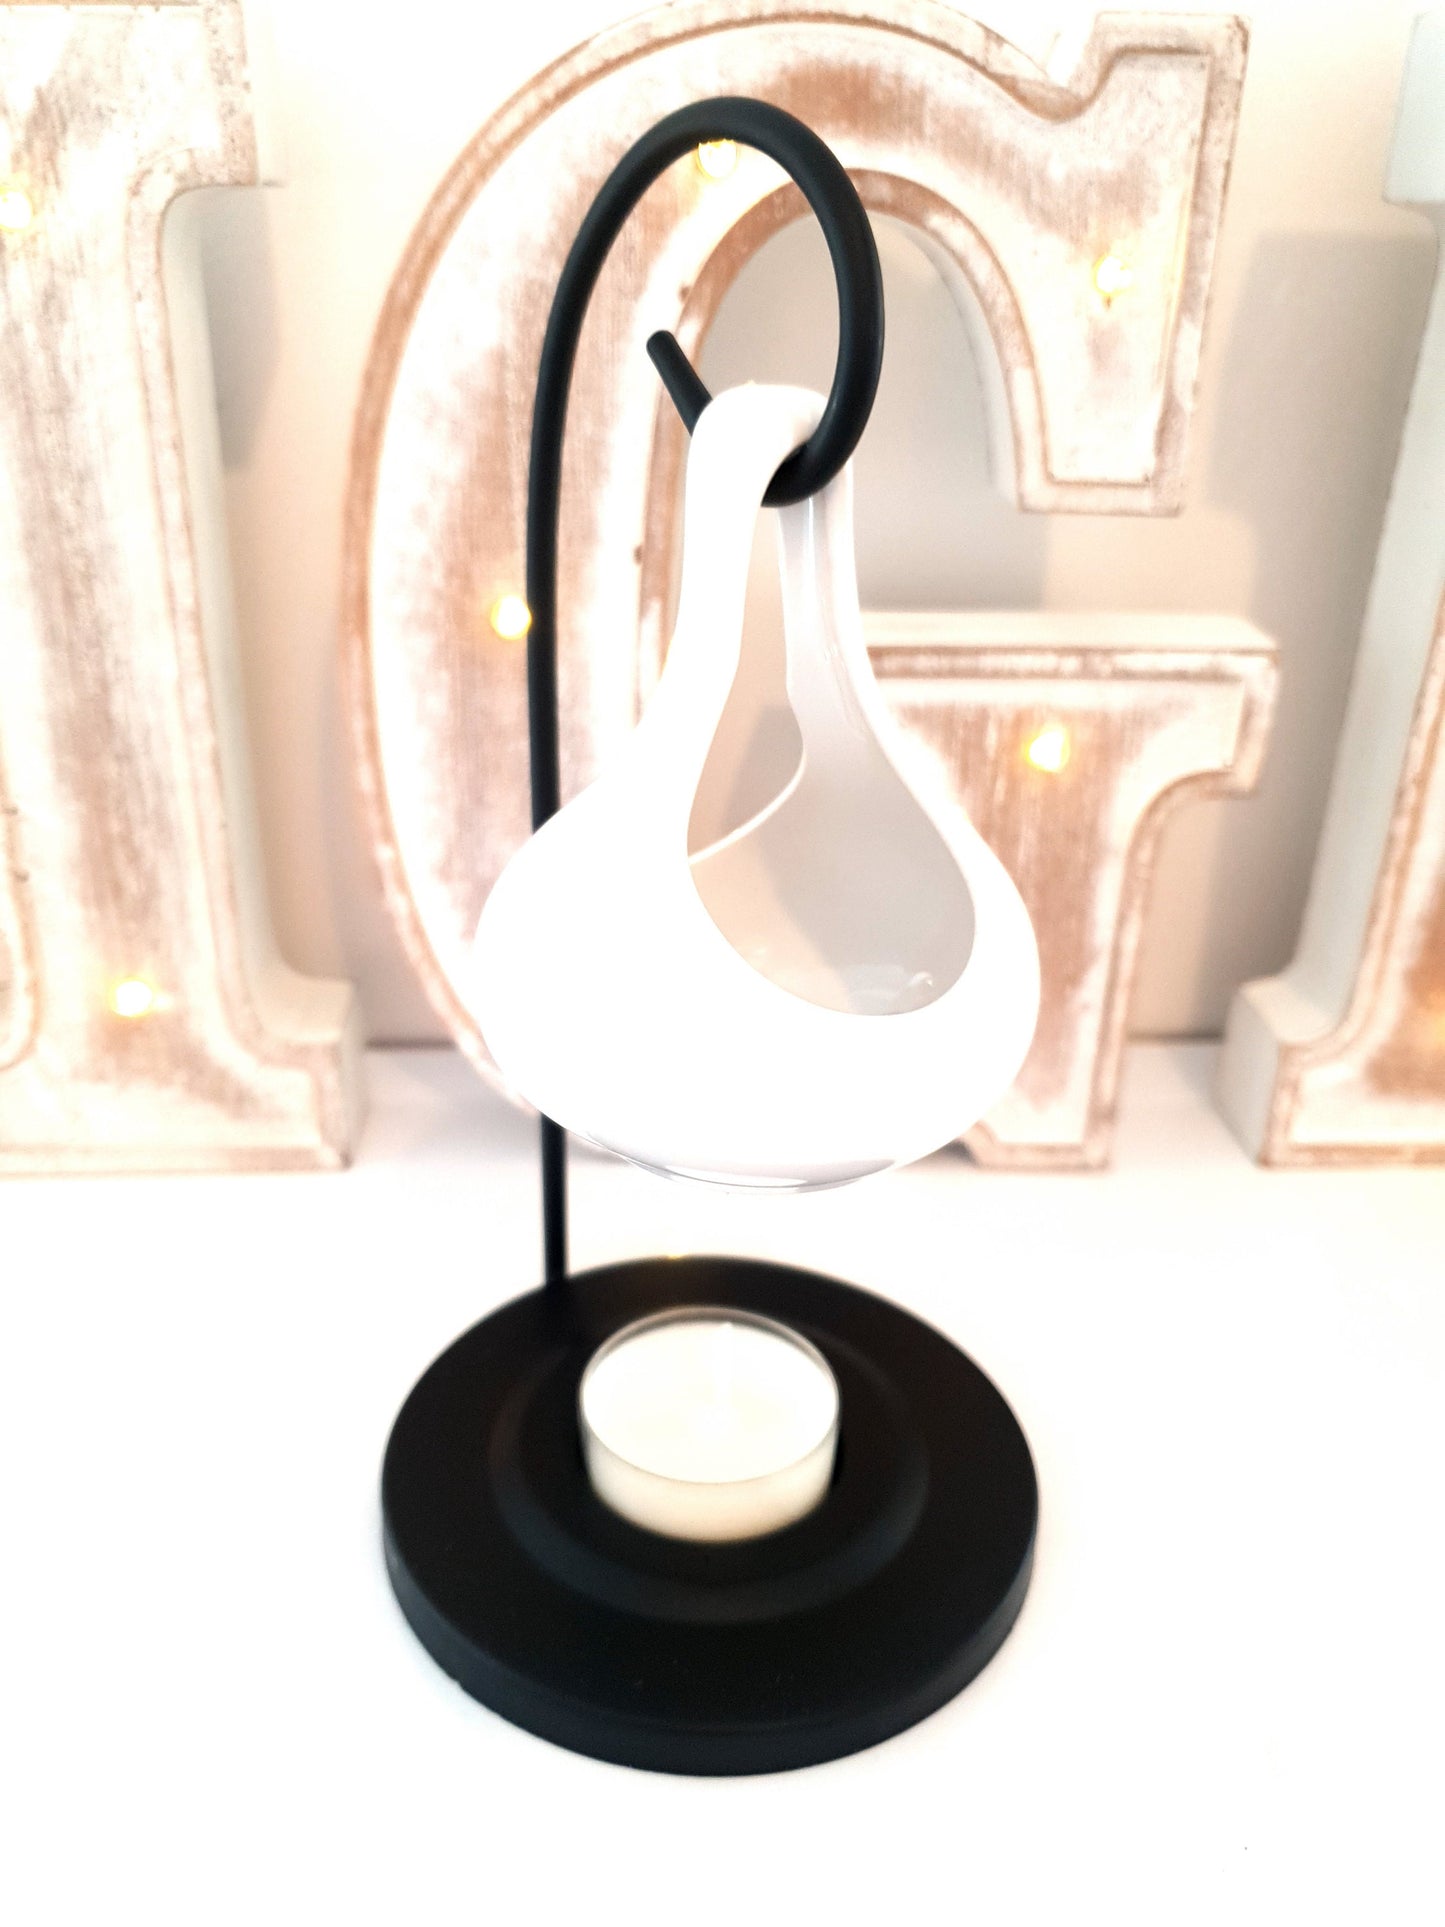 Hanging Wax Melt Burner.  10X19cm.  Surprise, complementary clamshell melt with your purchase.